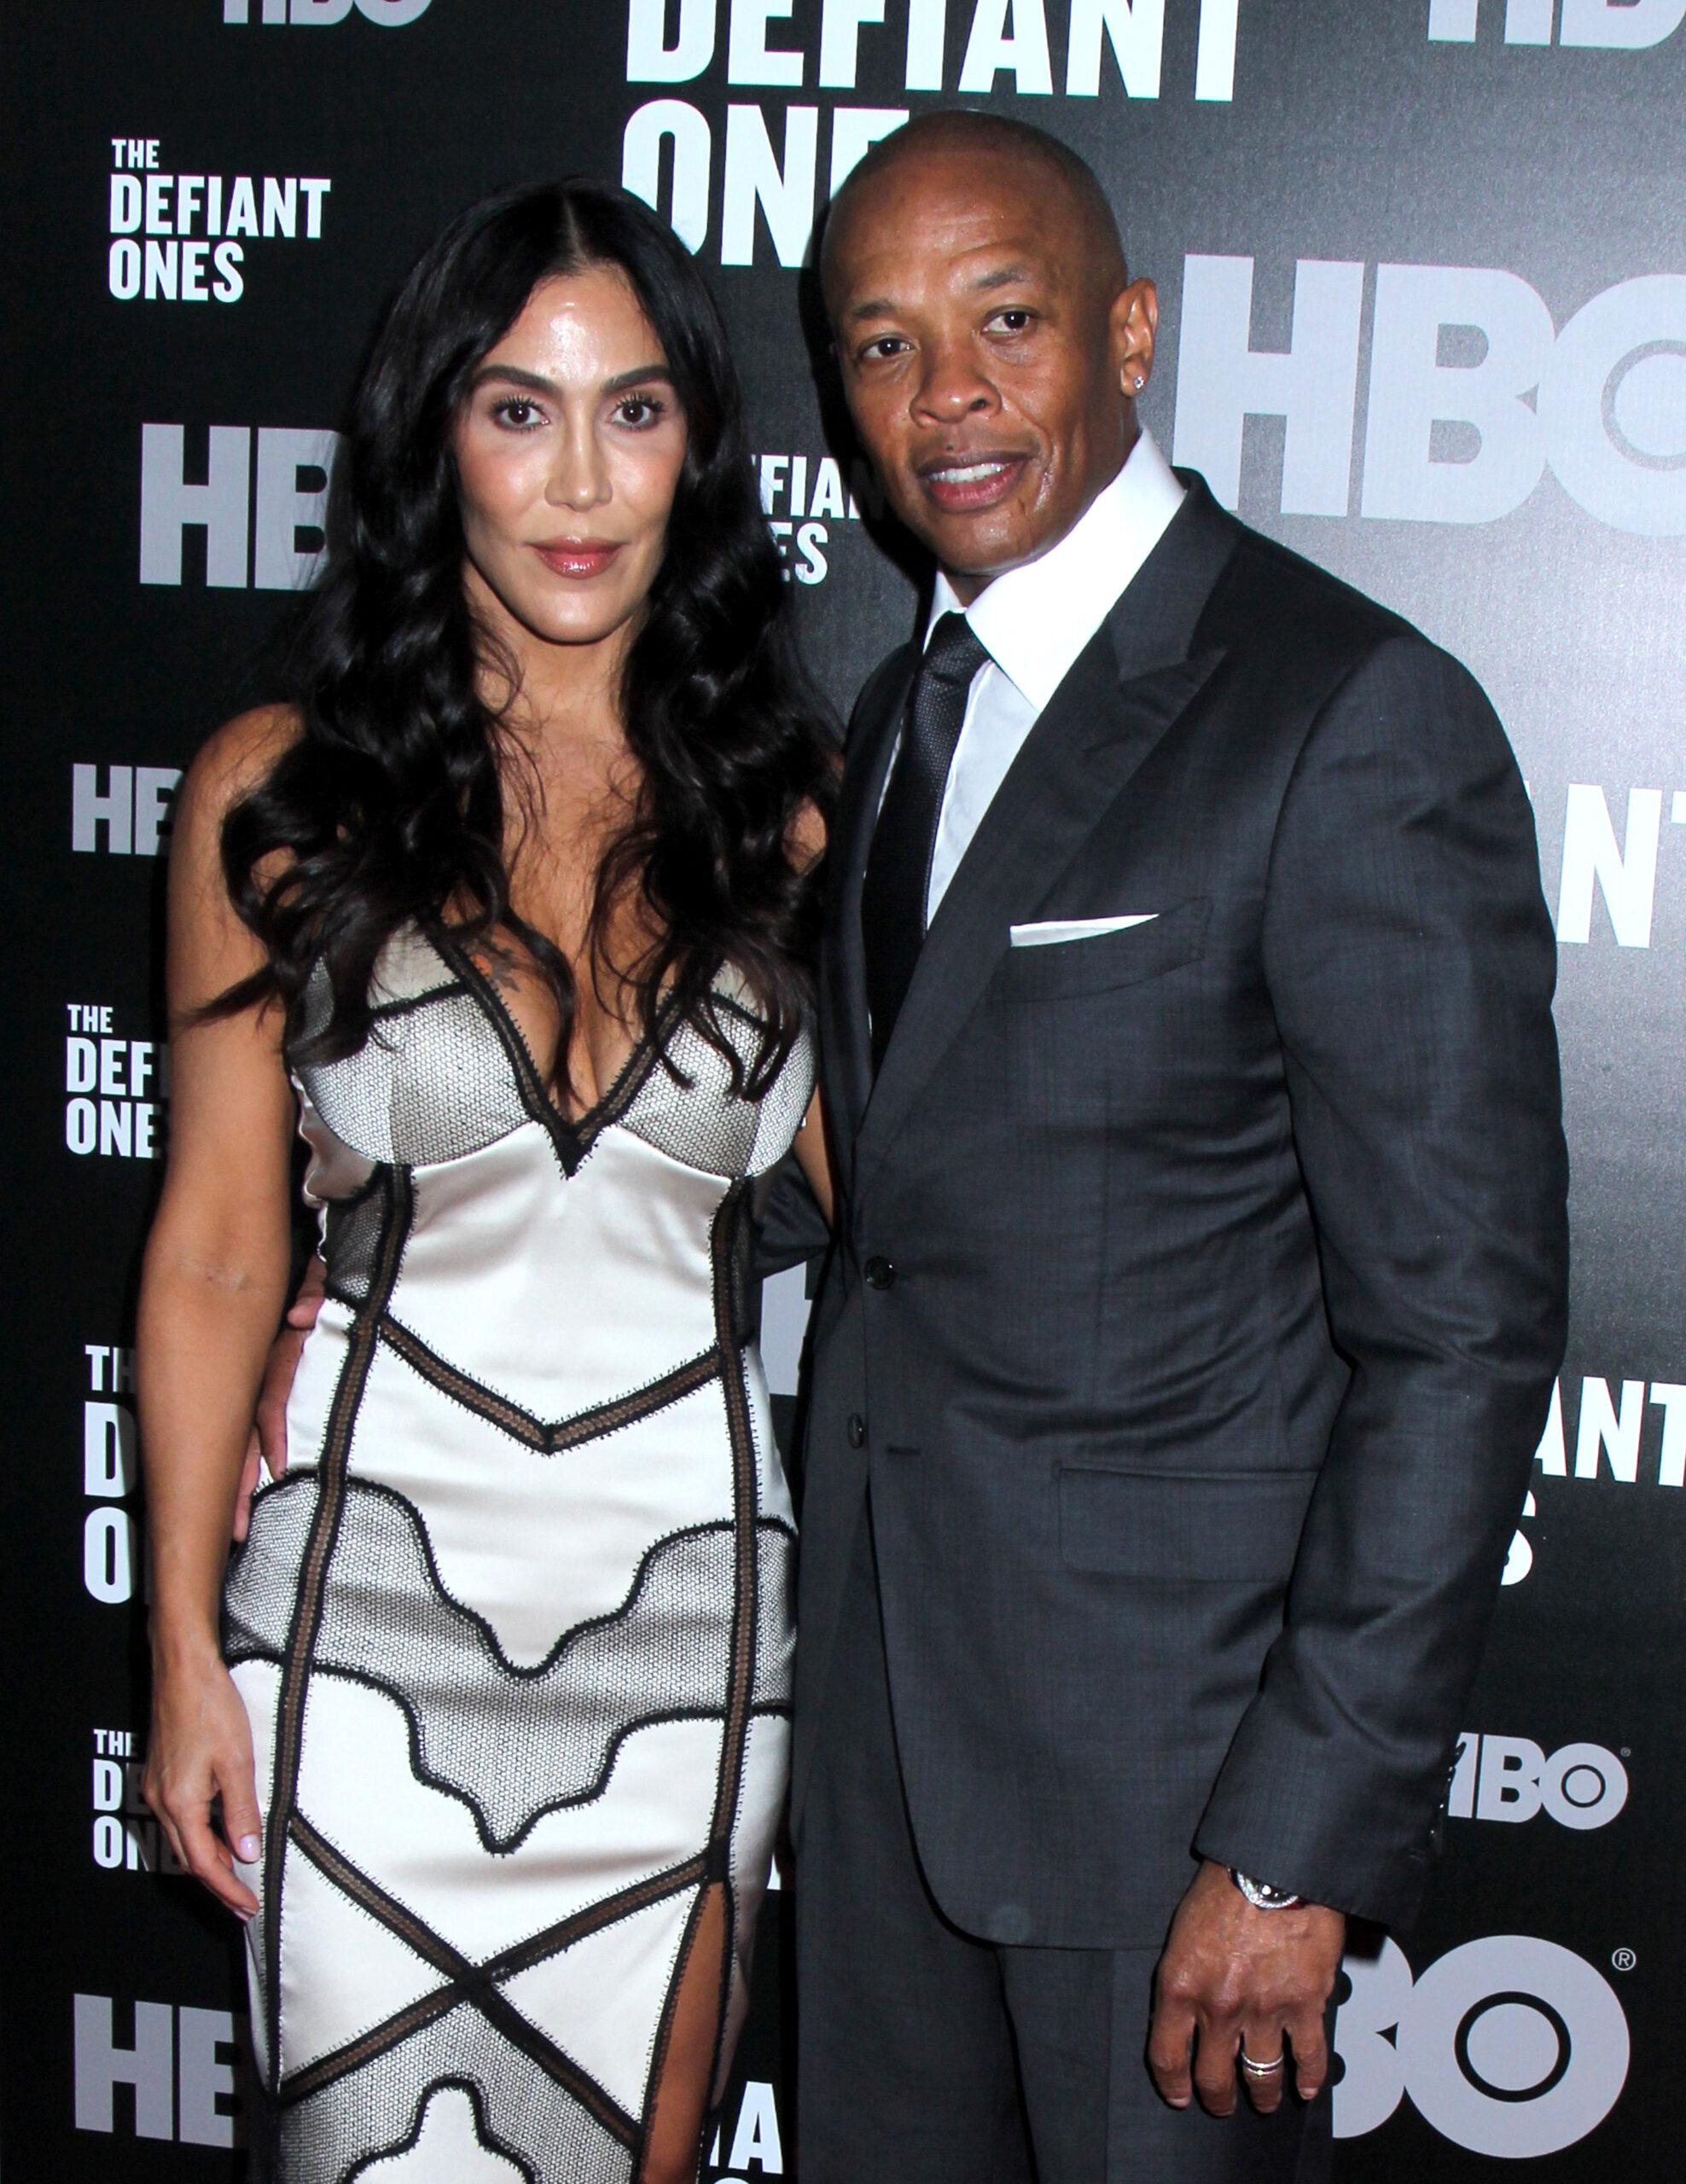 Dr. Dre Reveals Last Text To Ex-Wife, Let’s Keep Divorce ‘Classy And Fair’